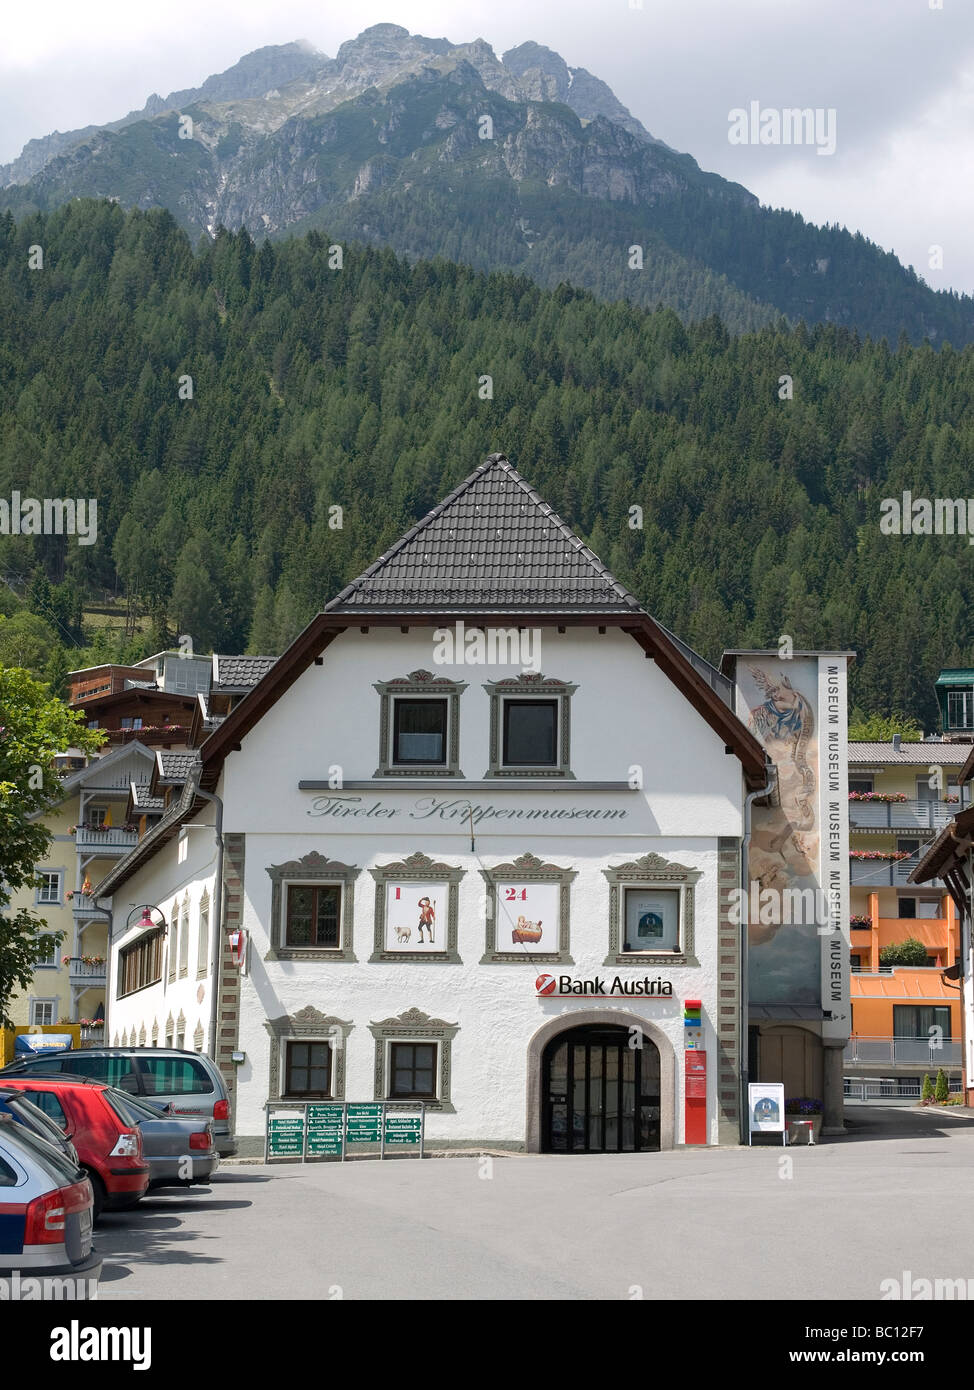 The Krippenmuseum and Bank Austria in Fulpmes Stubaital Tirol. The museum has puppets and scenes from the nativity Stock Photo